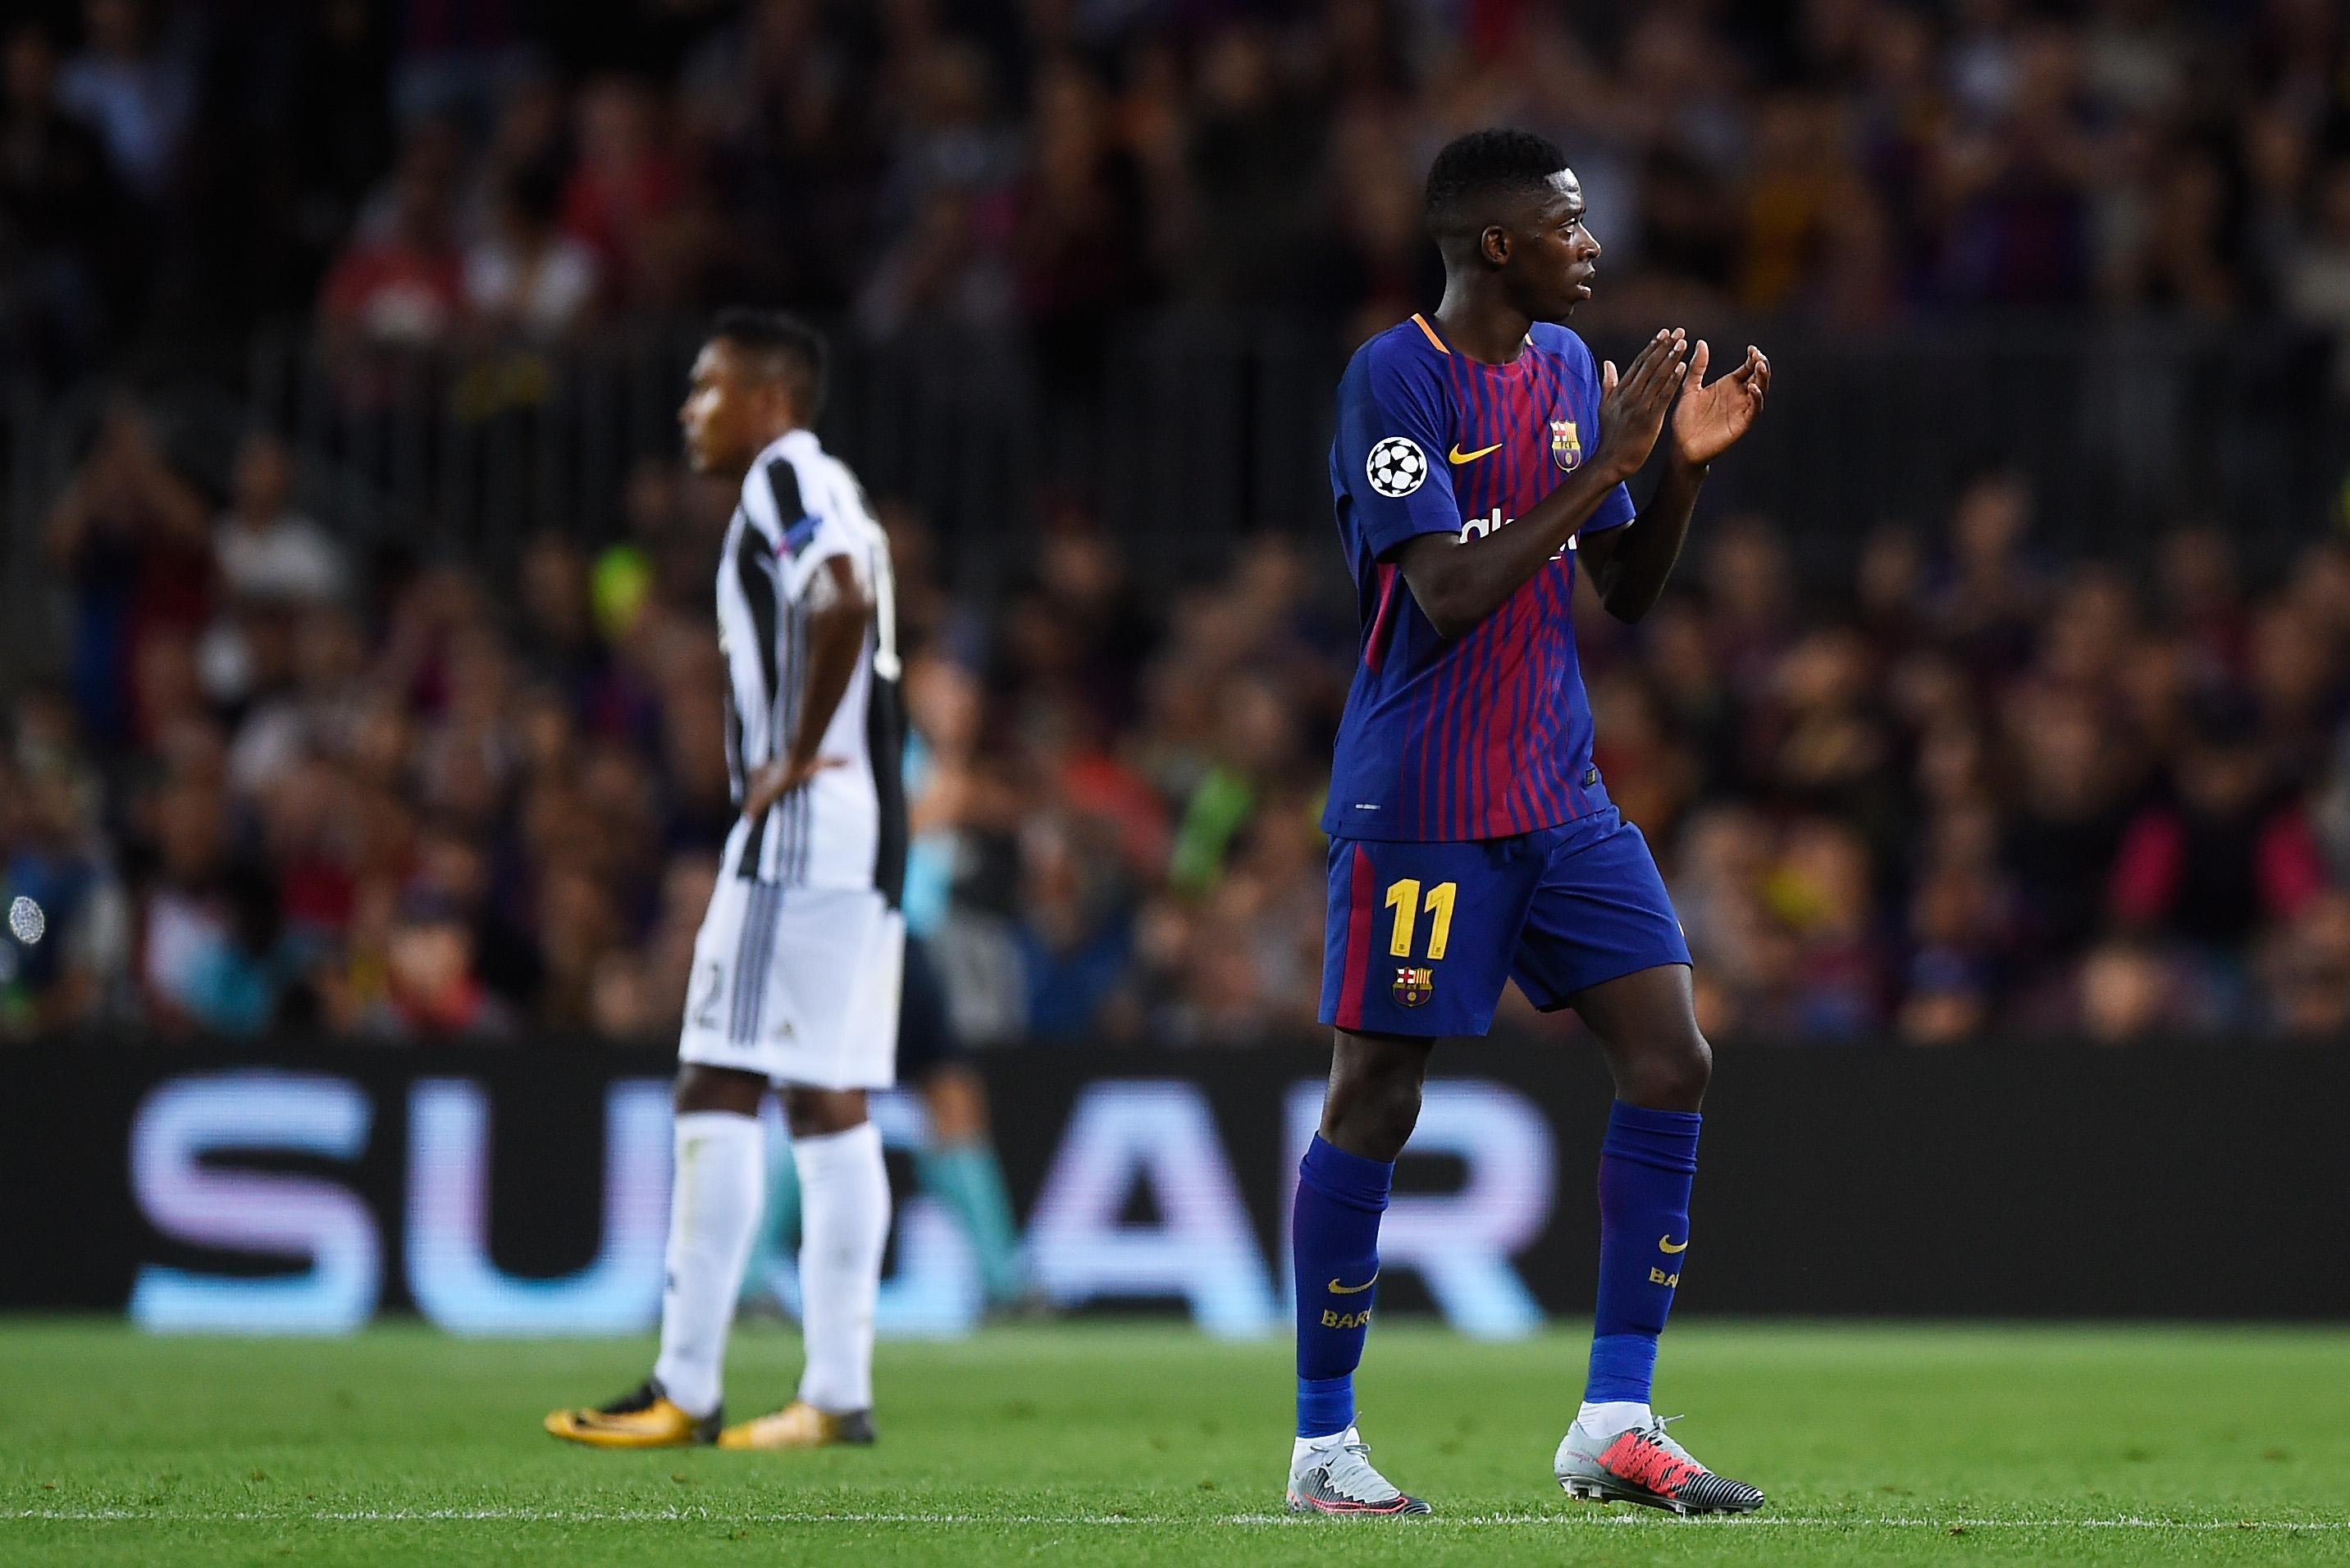 Free Download Ranked Every 17 Golden Boy Award Nominee From 25 1 2865x1912 For Your Desktop Mobile Tablet Explore 99 Ousmane Dembele Barcelona Wallpapers Ousmane Dembele Barcelona Wallpapers Barcelona Wallpapers Barcelona Hd Wallpaper